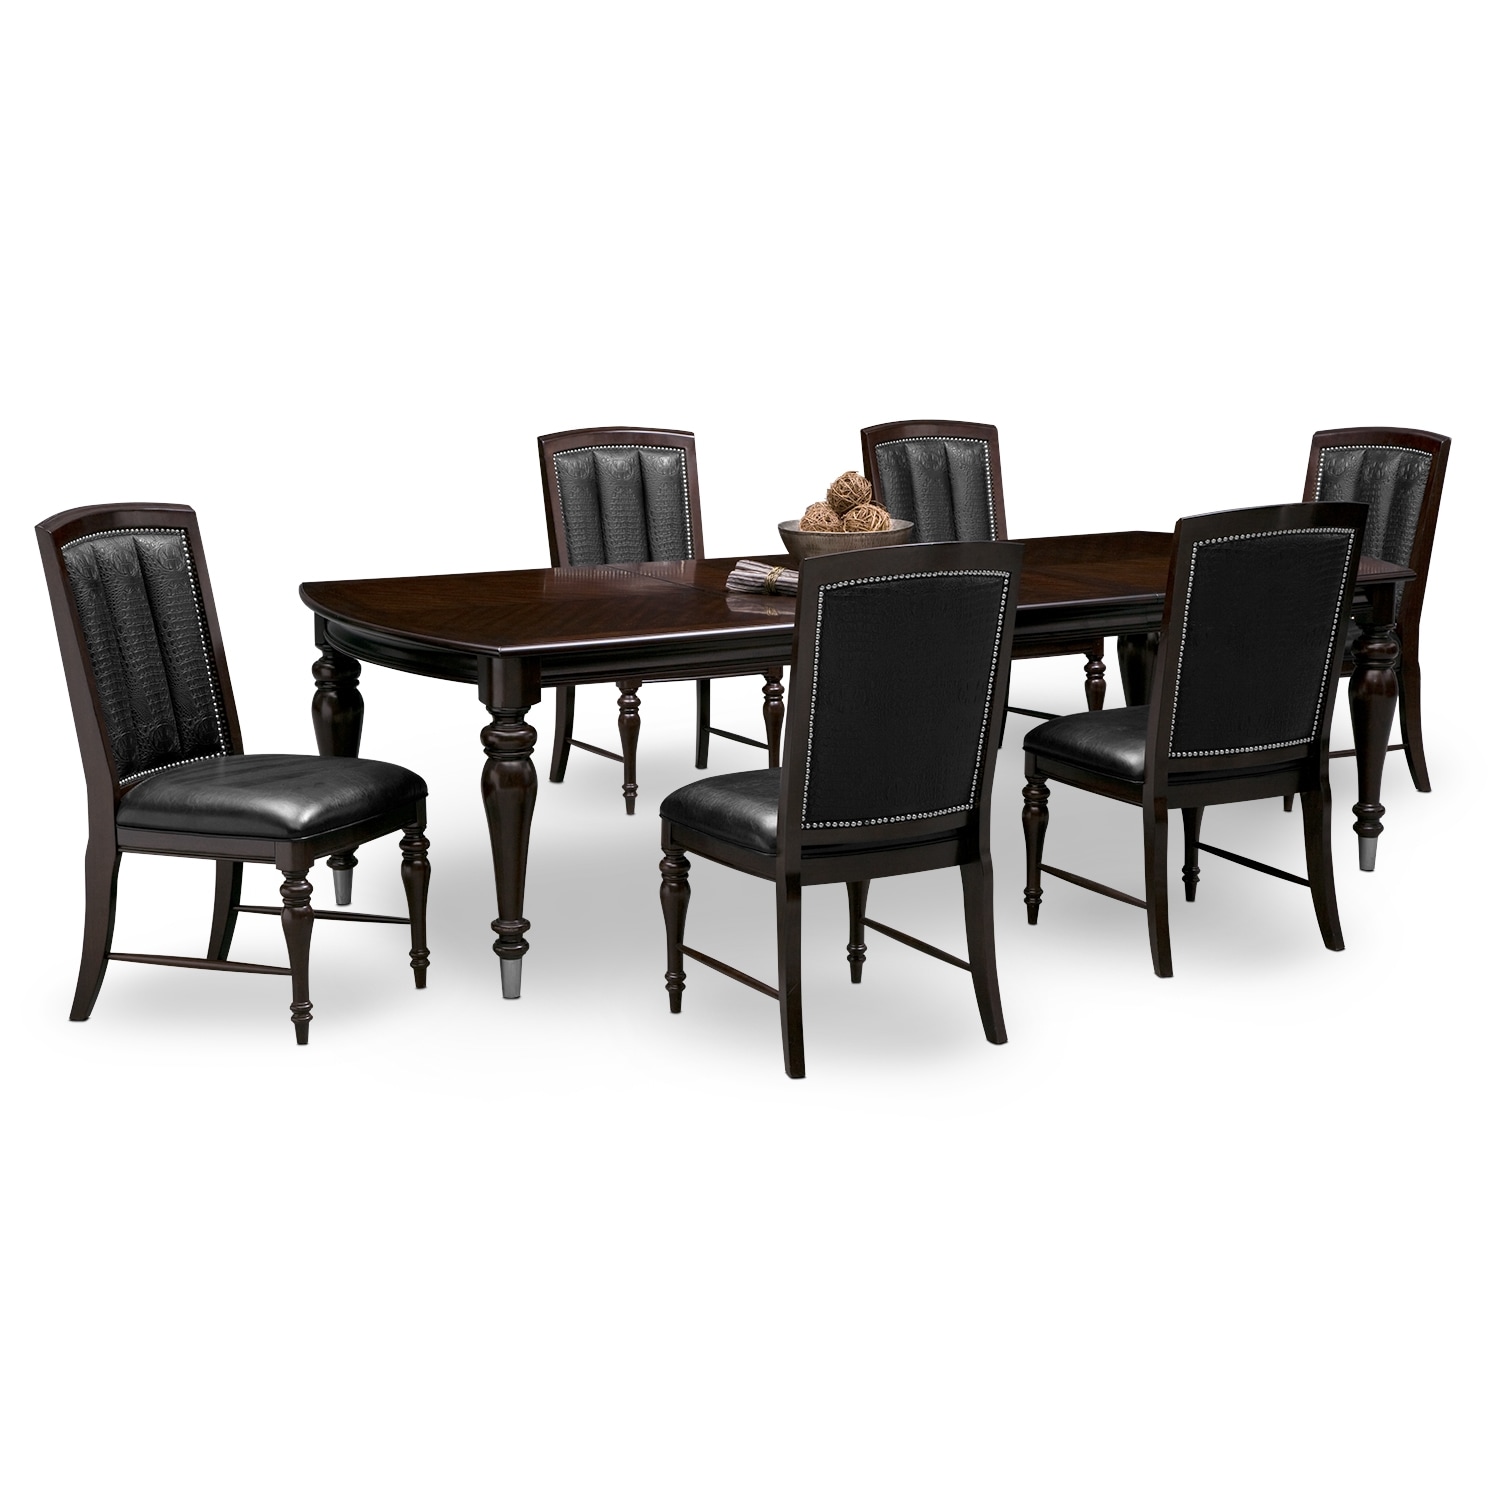 Esquire Dining Table And 6, Value City Dining Room Table